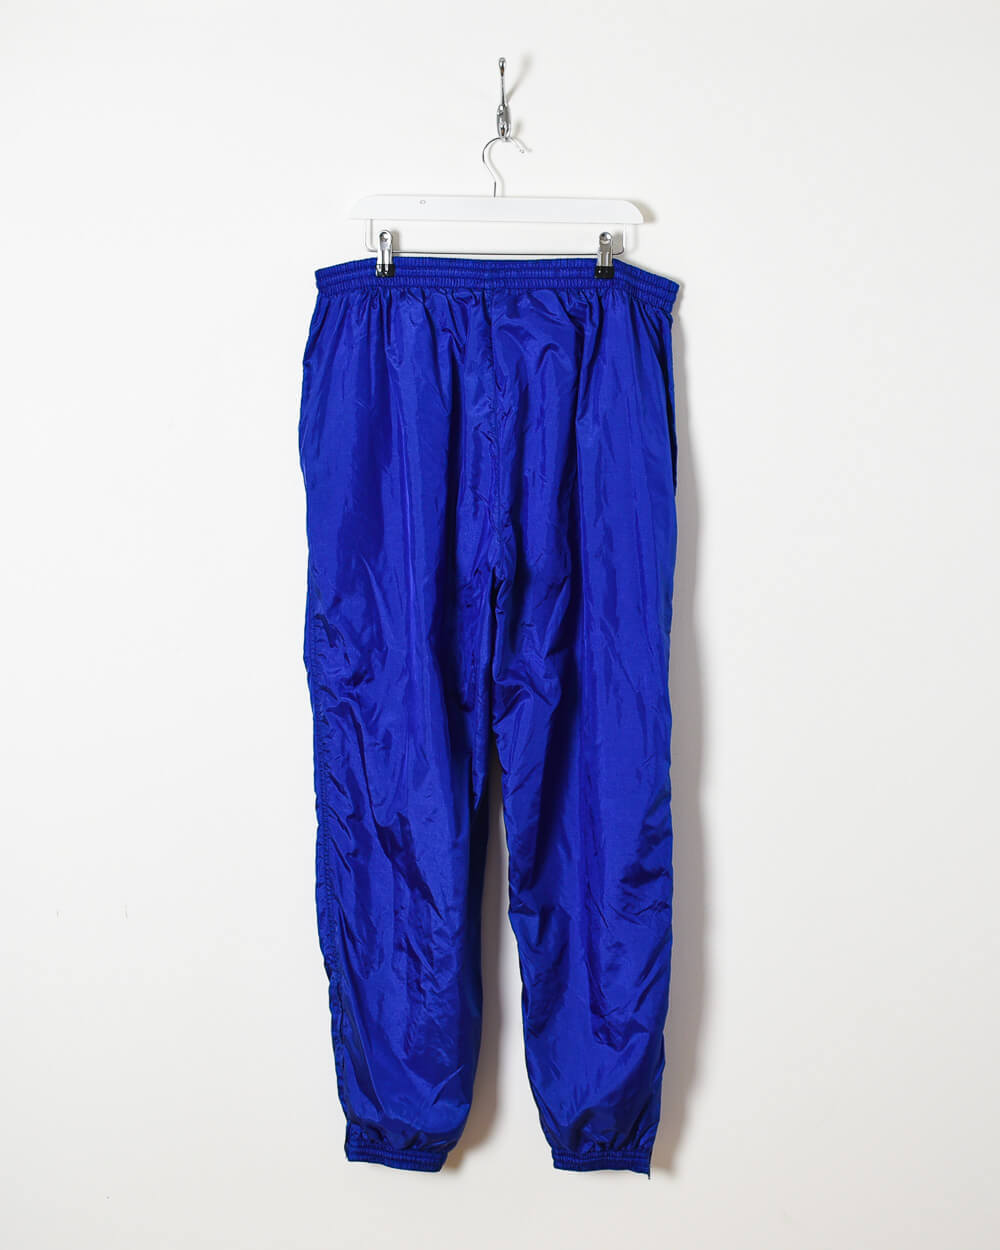 Nike Shell Tracksuit Bottoms - W34L32 - Domno Vintage 90s, 80s, 00s Retro and Vintage Clothing 